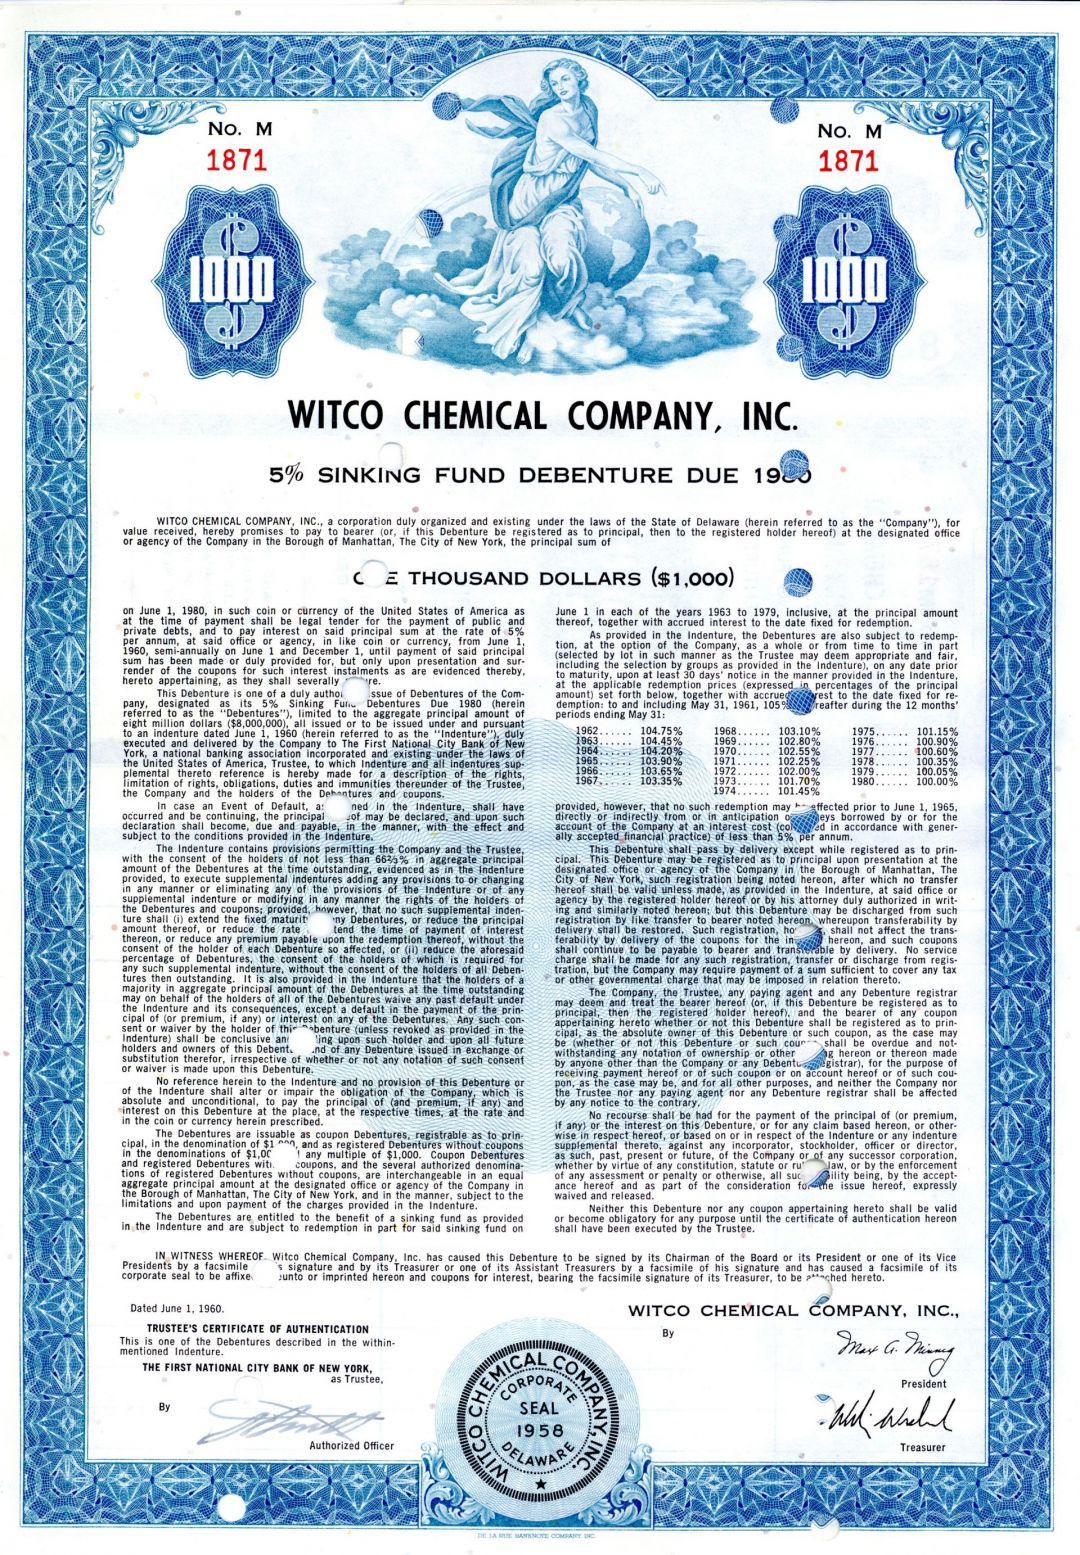 Witco Chemical Co., Inc. - $1,000 Bond - Affiliated with the Crompton Corporation